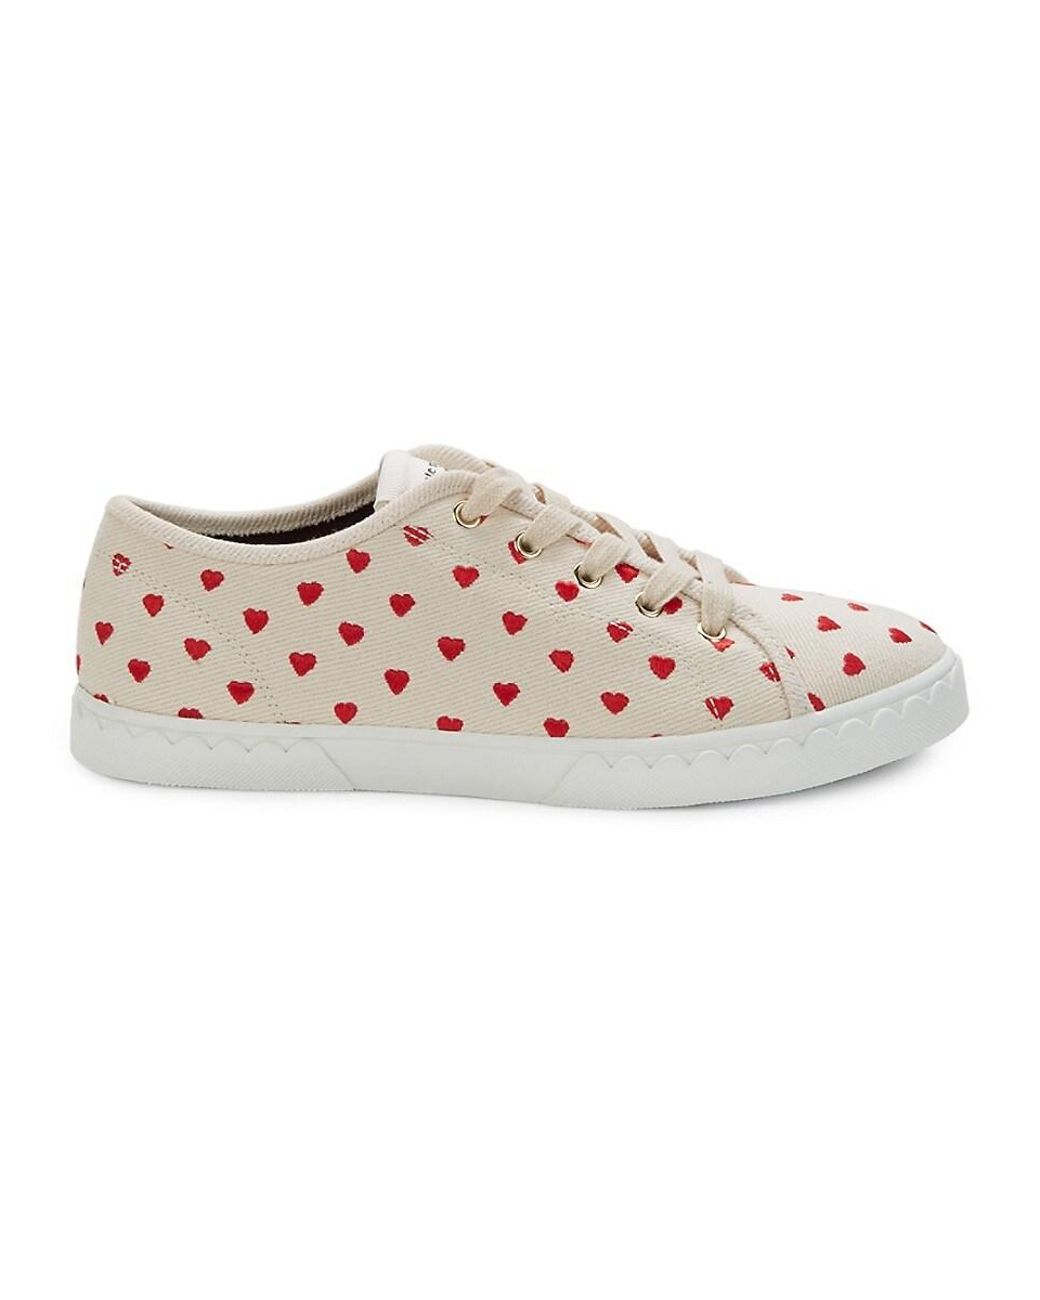 Kate Spade Vale Heart Canvas Sneakers in White Red (White) | Lyst